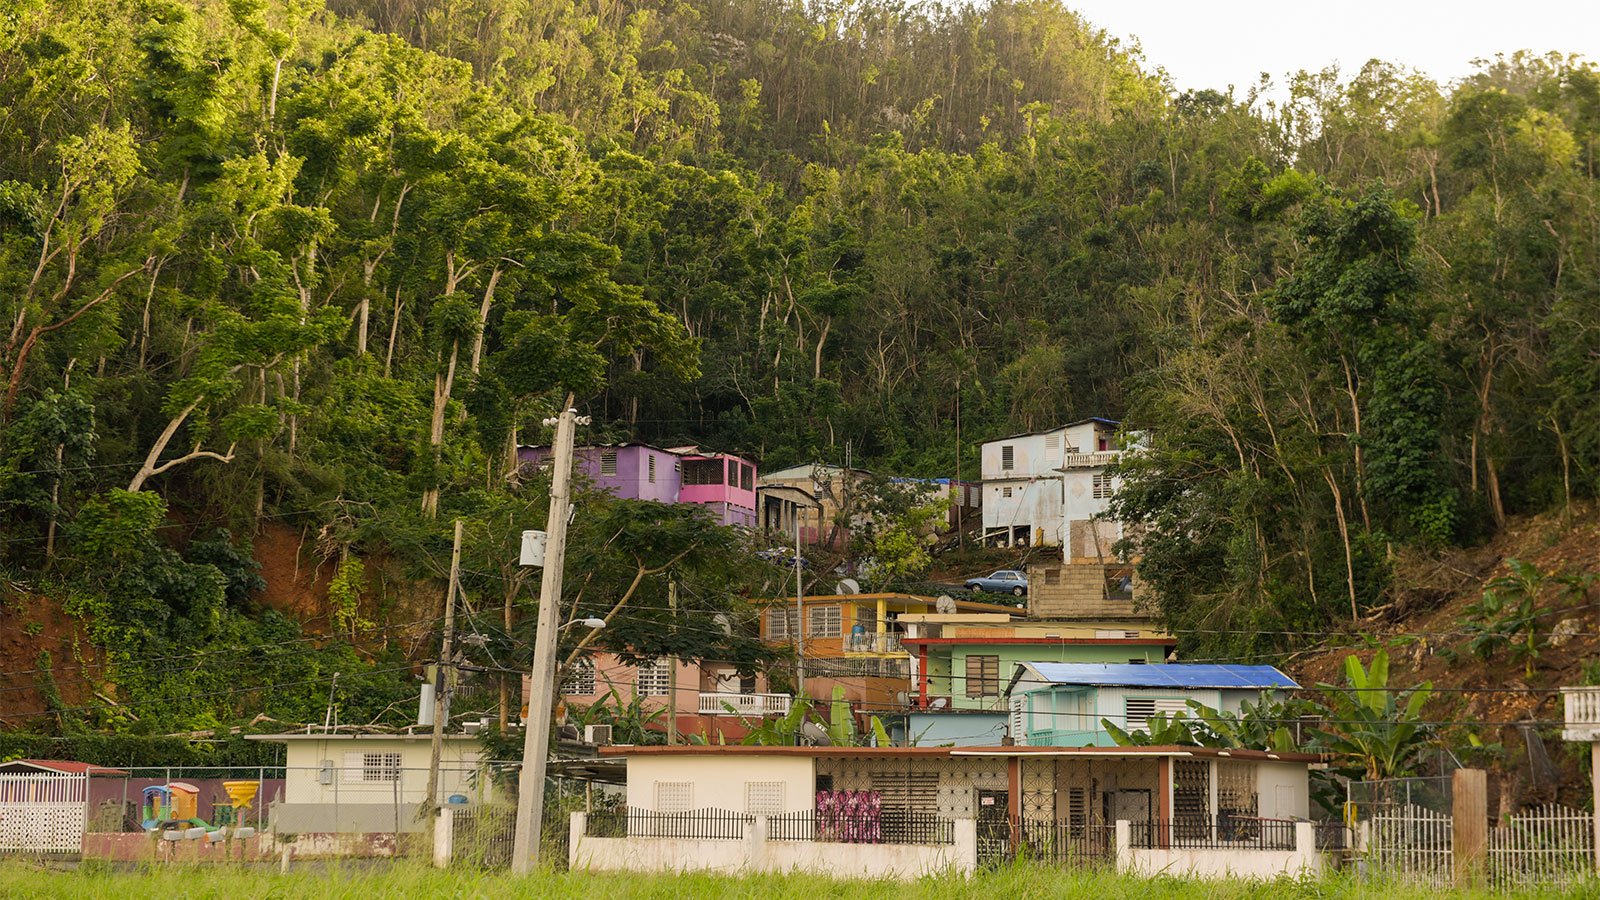 homes showing hurricane damage in Puerto Rico